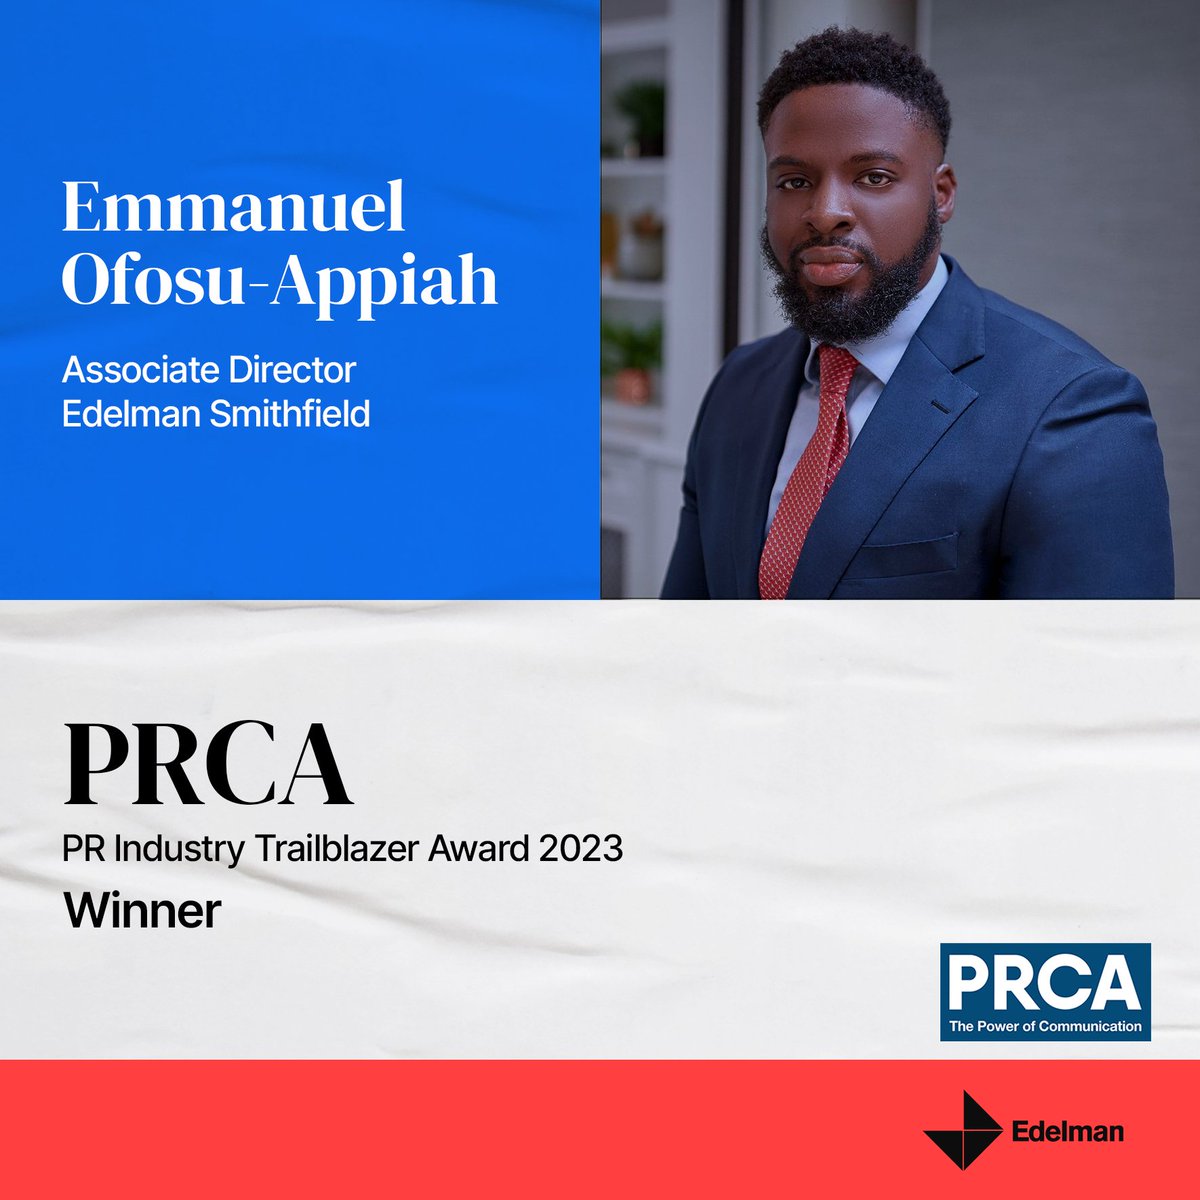 We are proud to share that Emmanuel Ofosu-Appiah, Associate Director, Edelman Smithfield, has won the @PRCA_HQ PR Industry Trailblazer Award for 2023 for his outstanding contribution to the industry. Congratulations Emmanuel on this brilliant achievement!